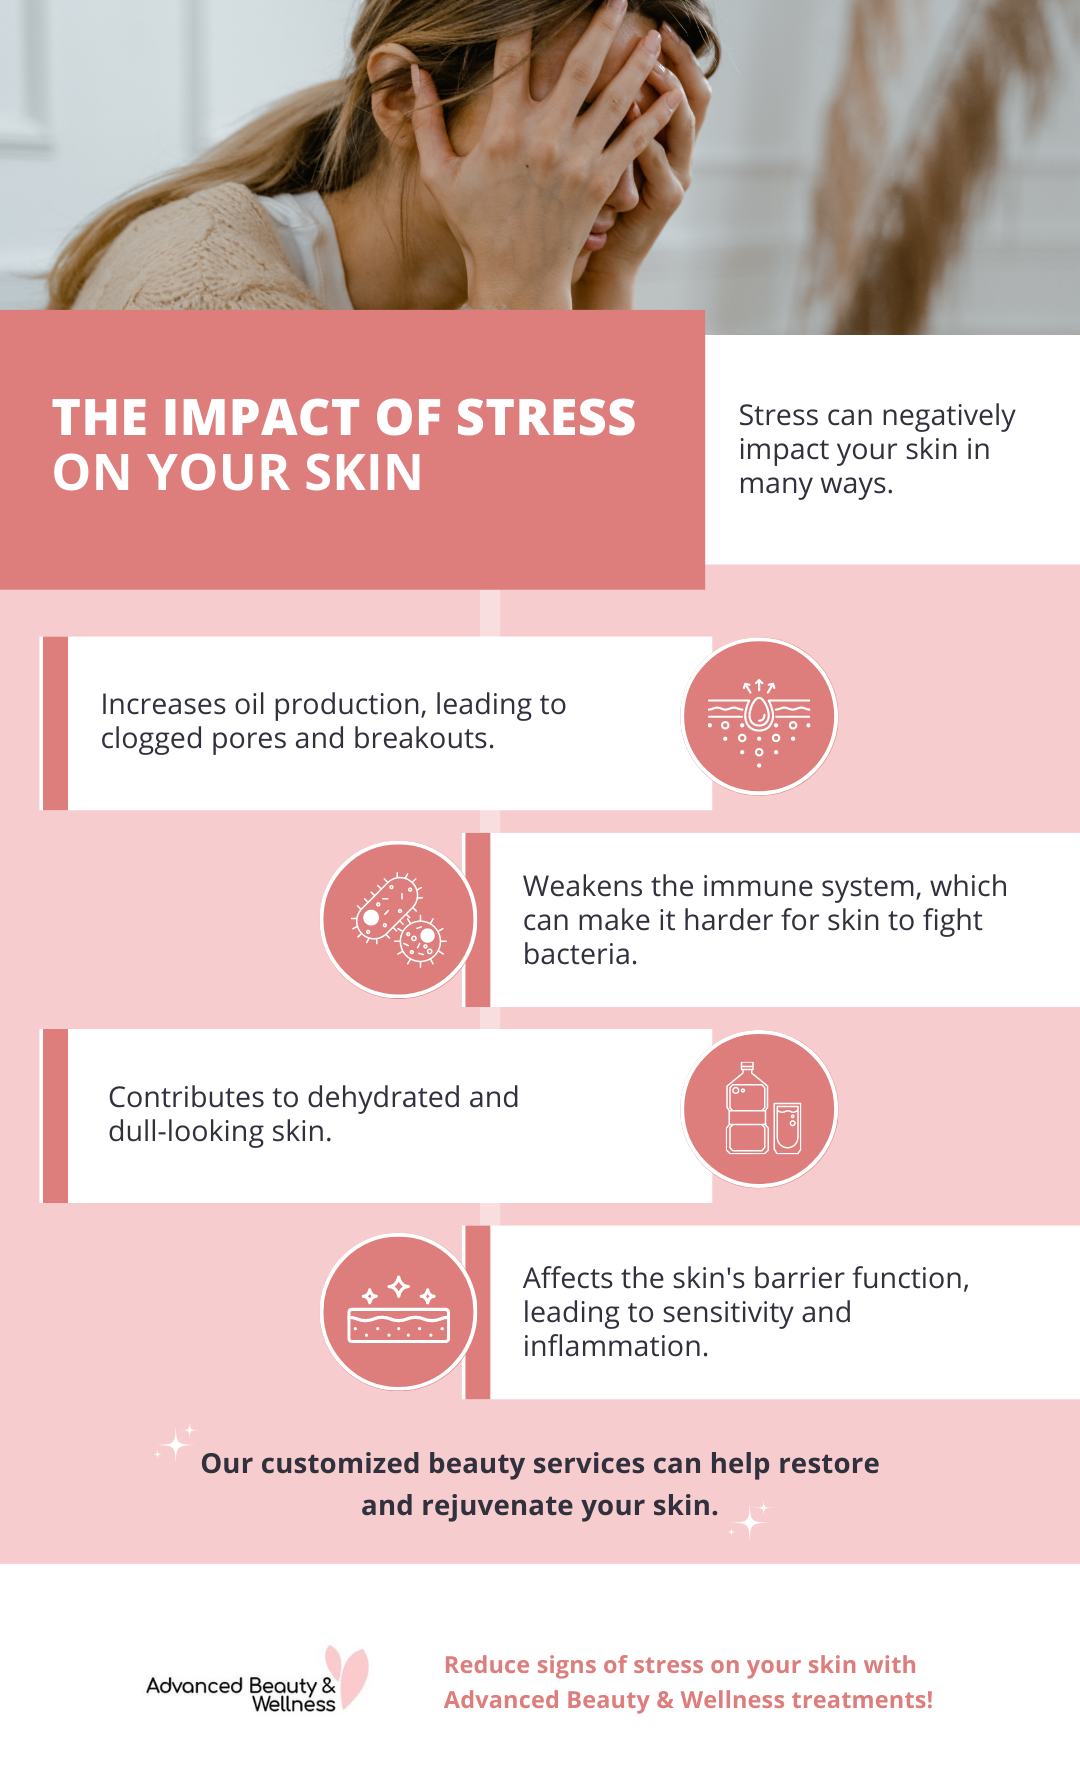 M38212 - Information Design - The Impact of Stress on Your Skin.png